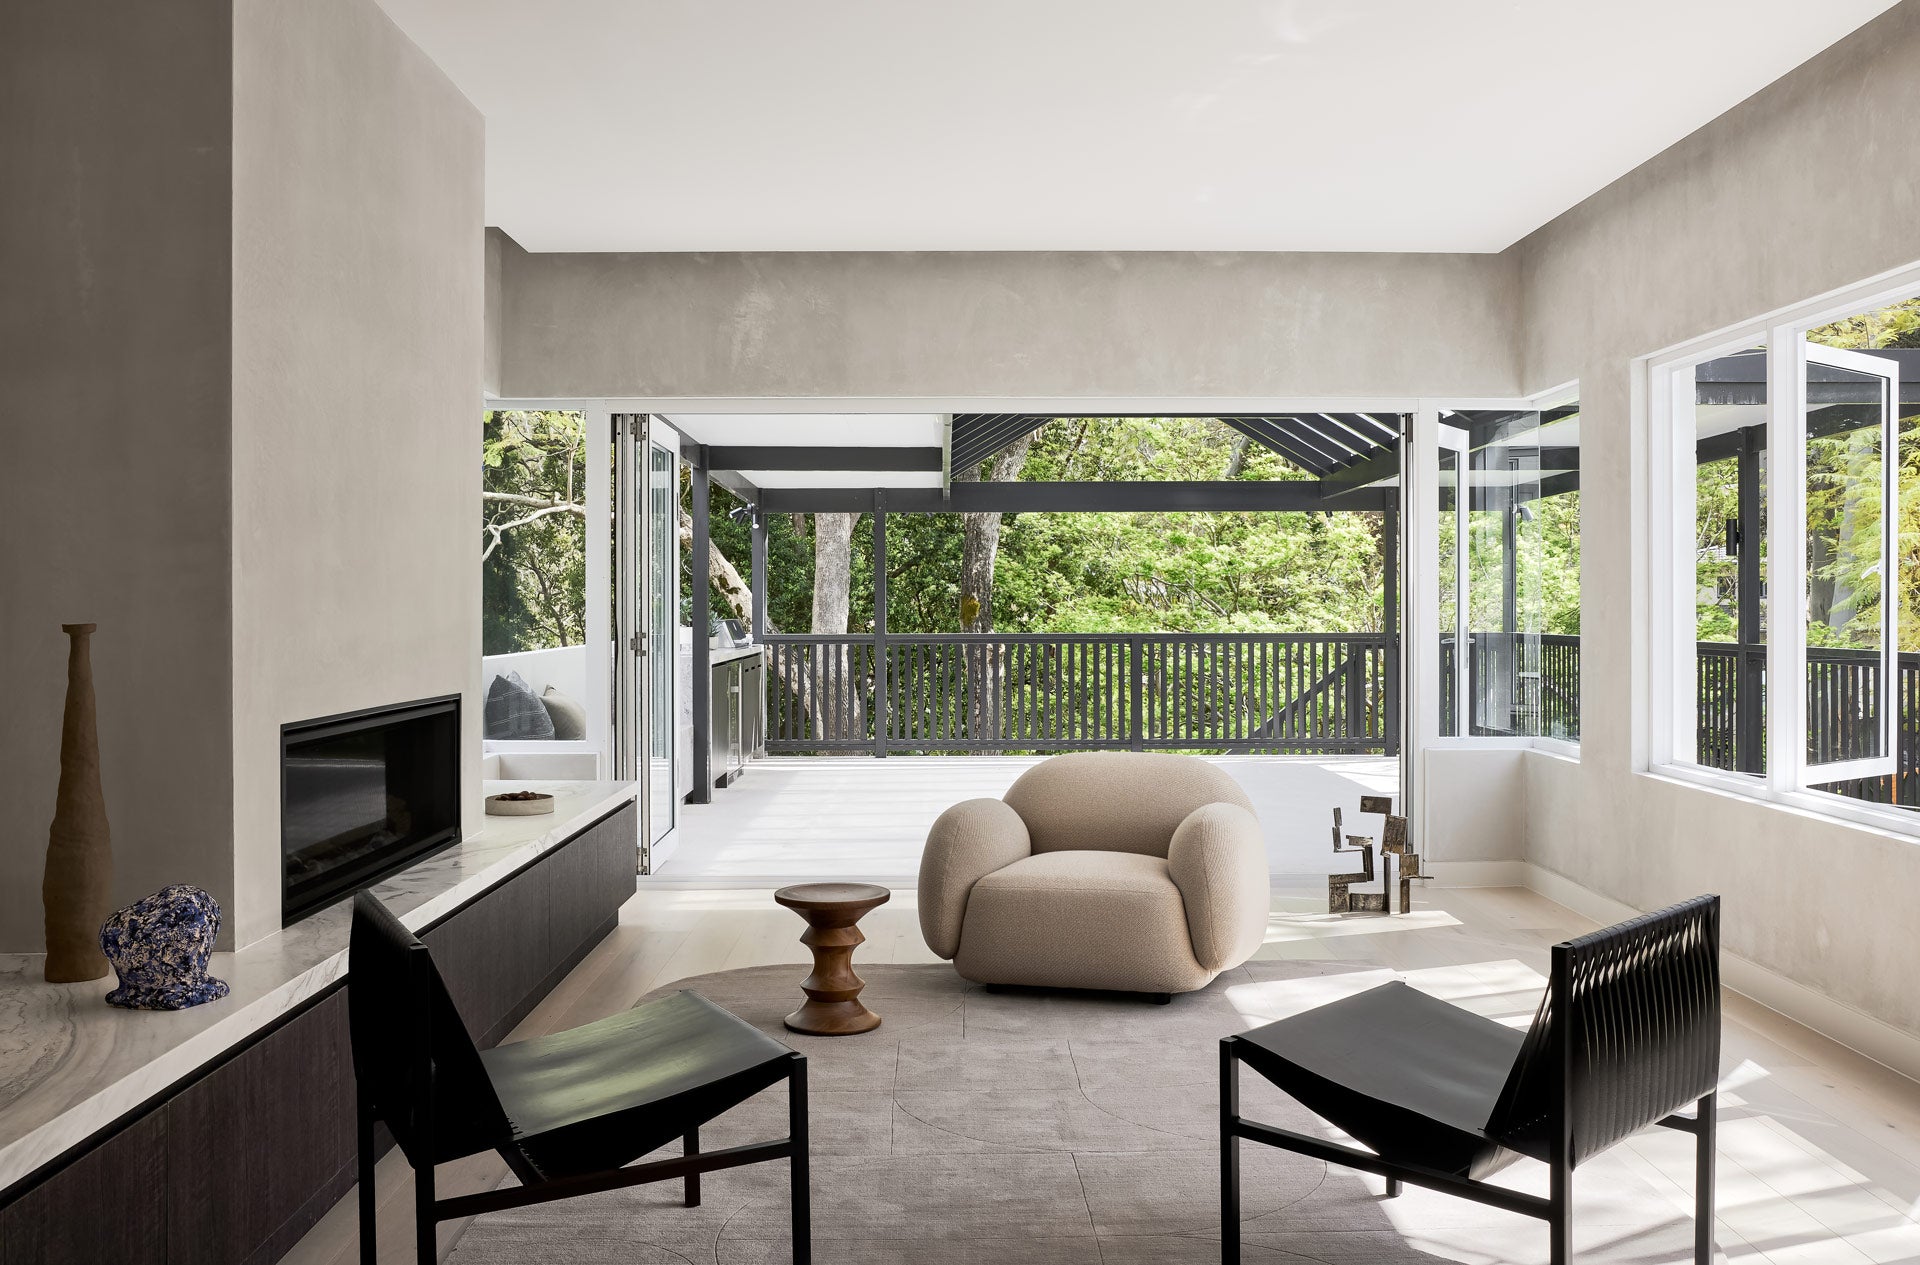 DL Lounge Chair and Sundae Armchair | Chatswood Residence, Integriti Projects, NSW | DesignByThem